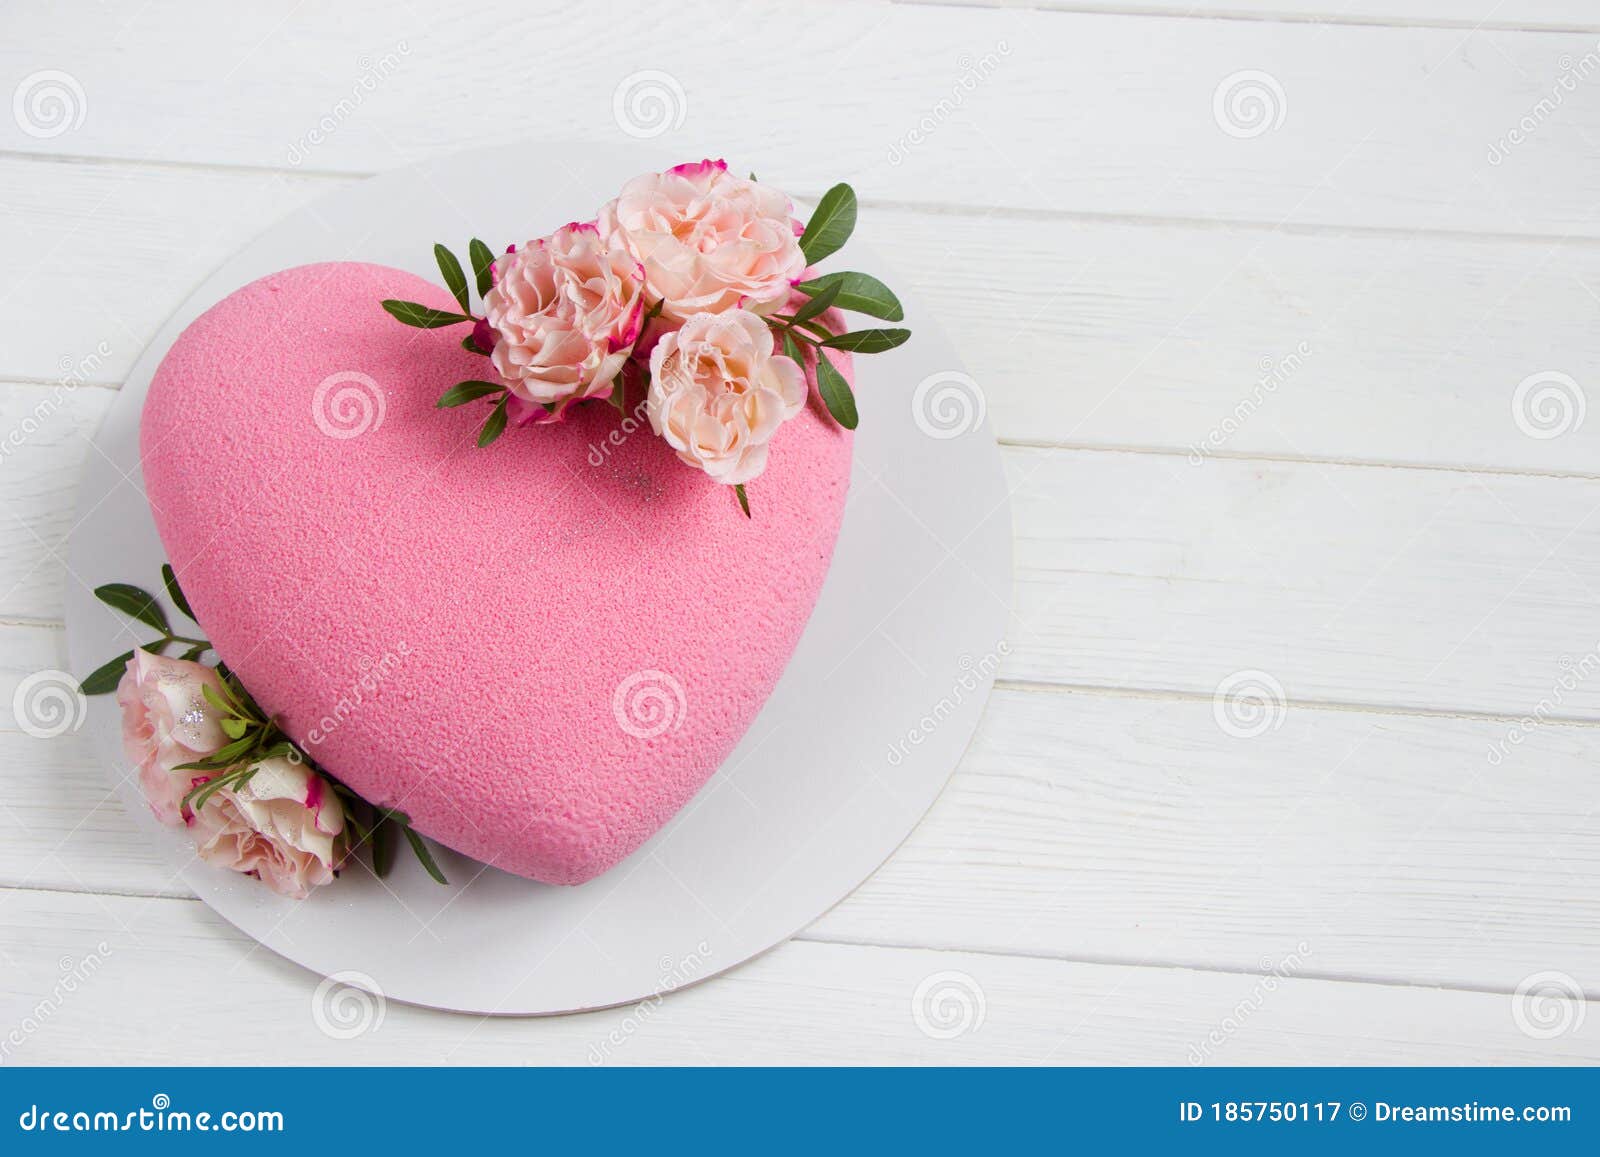 Modern Mousse Cake .Heart Shape Cake Covered with Pink Chocolate ...